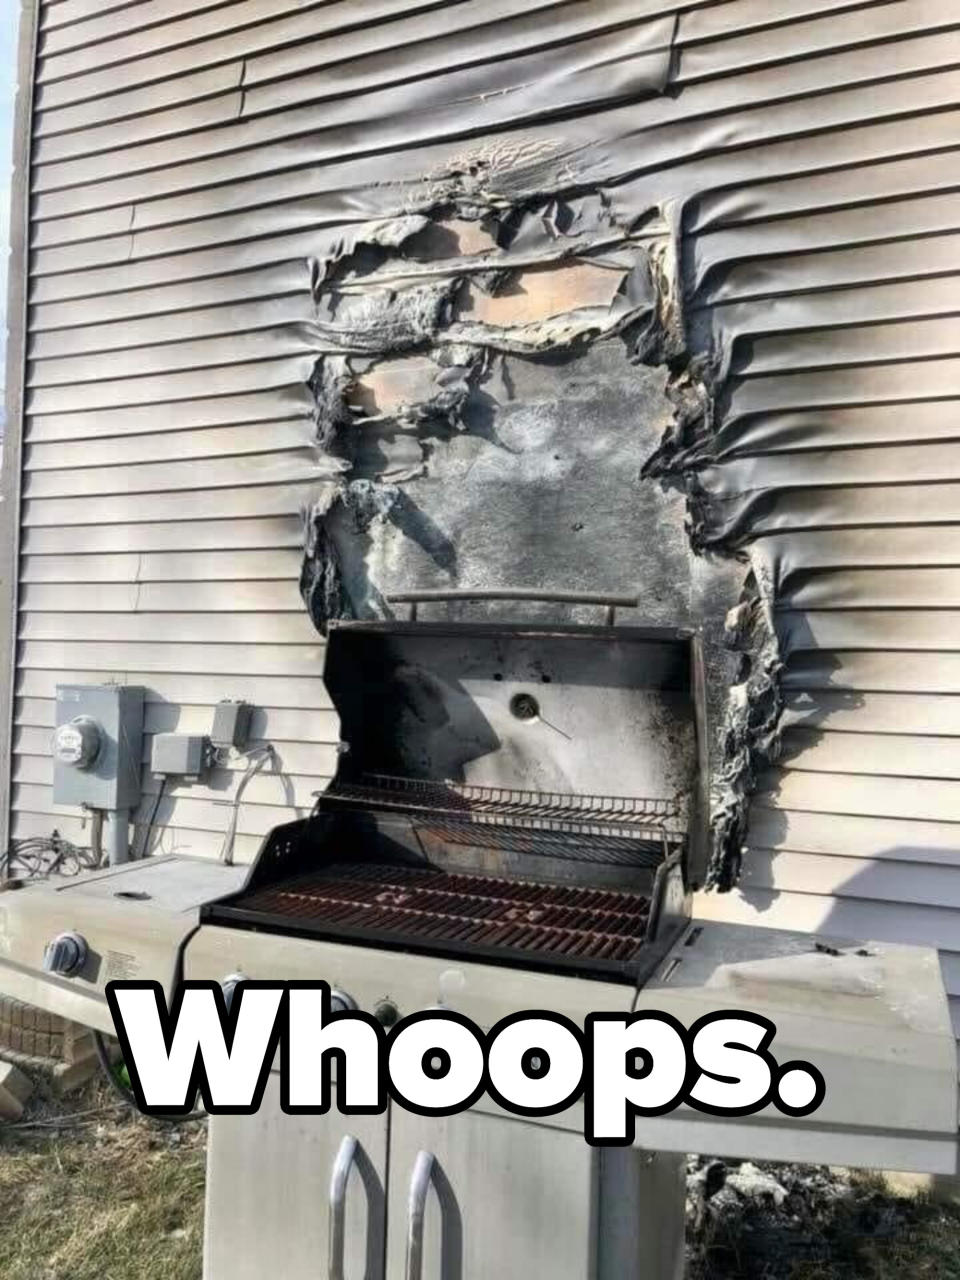 grilled that burned the siding of a house